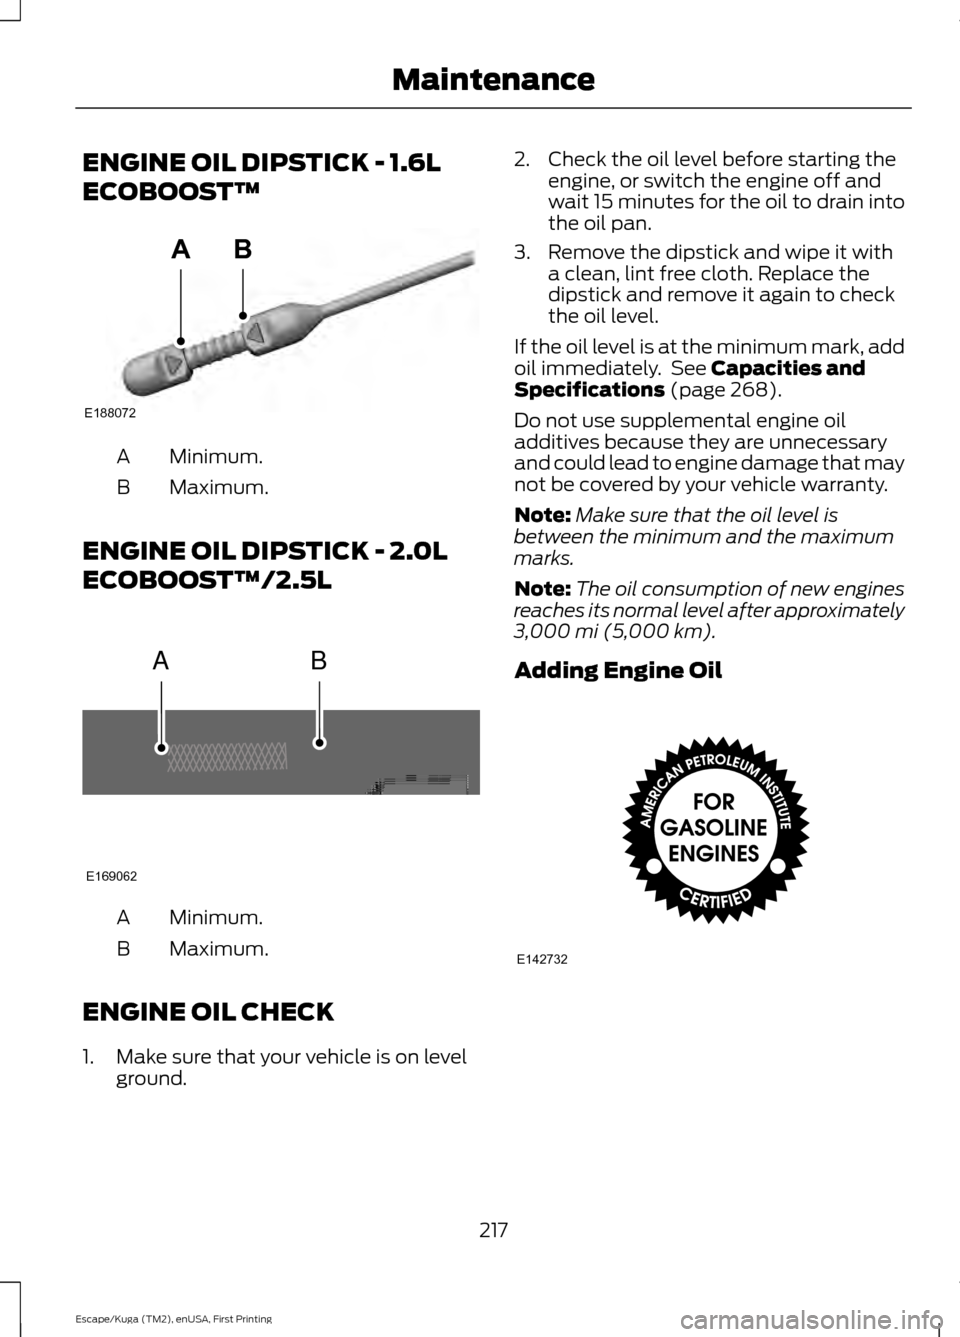 FORD ESCAPE 2016 3.G Owners Manual ENGINE OIL DIPSTICK - 1.6L
ECOBOOST™
Minimum.
A
Maximum.
B
ENGINE OIL DIPSTICK - 2.0L
ECOBOOST™/2.5L Minimum.
A
Maximum.
B
ENGINE OIL CHECK
1. Make sure that your vehicle is on level ground. 2. Ch